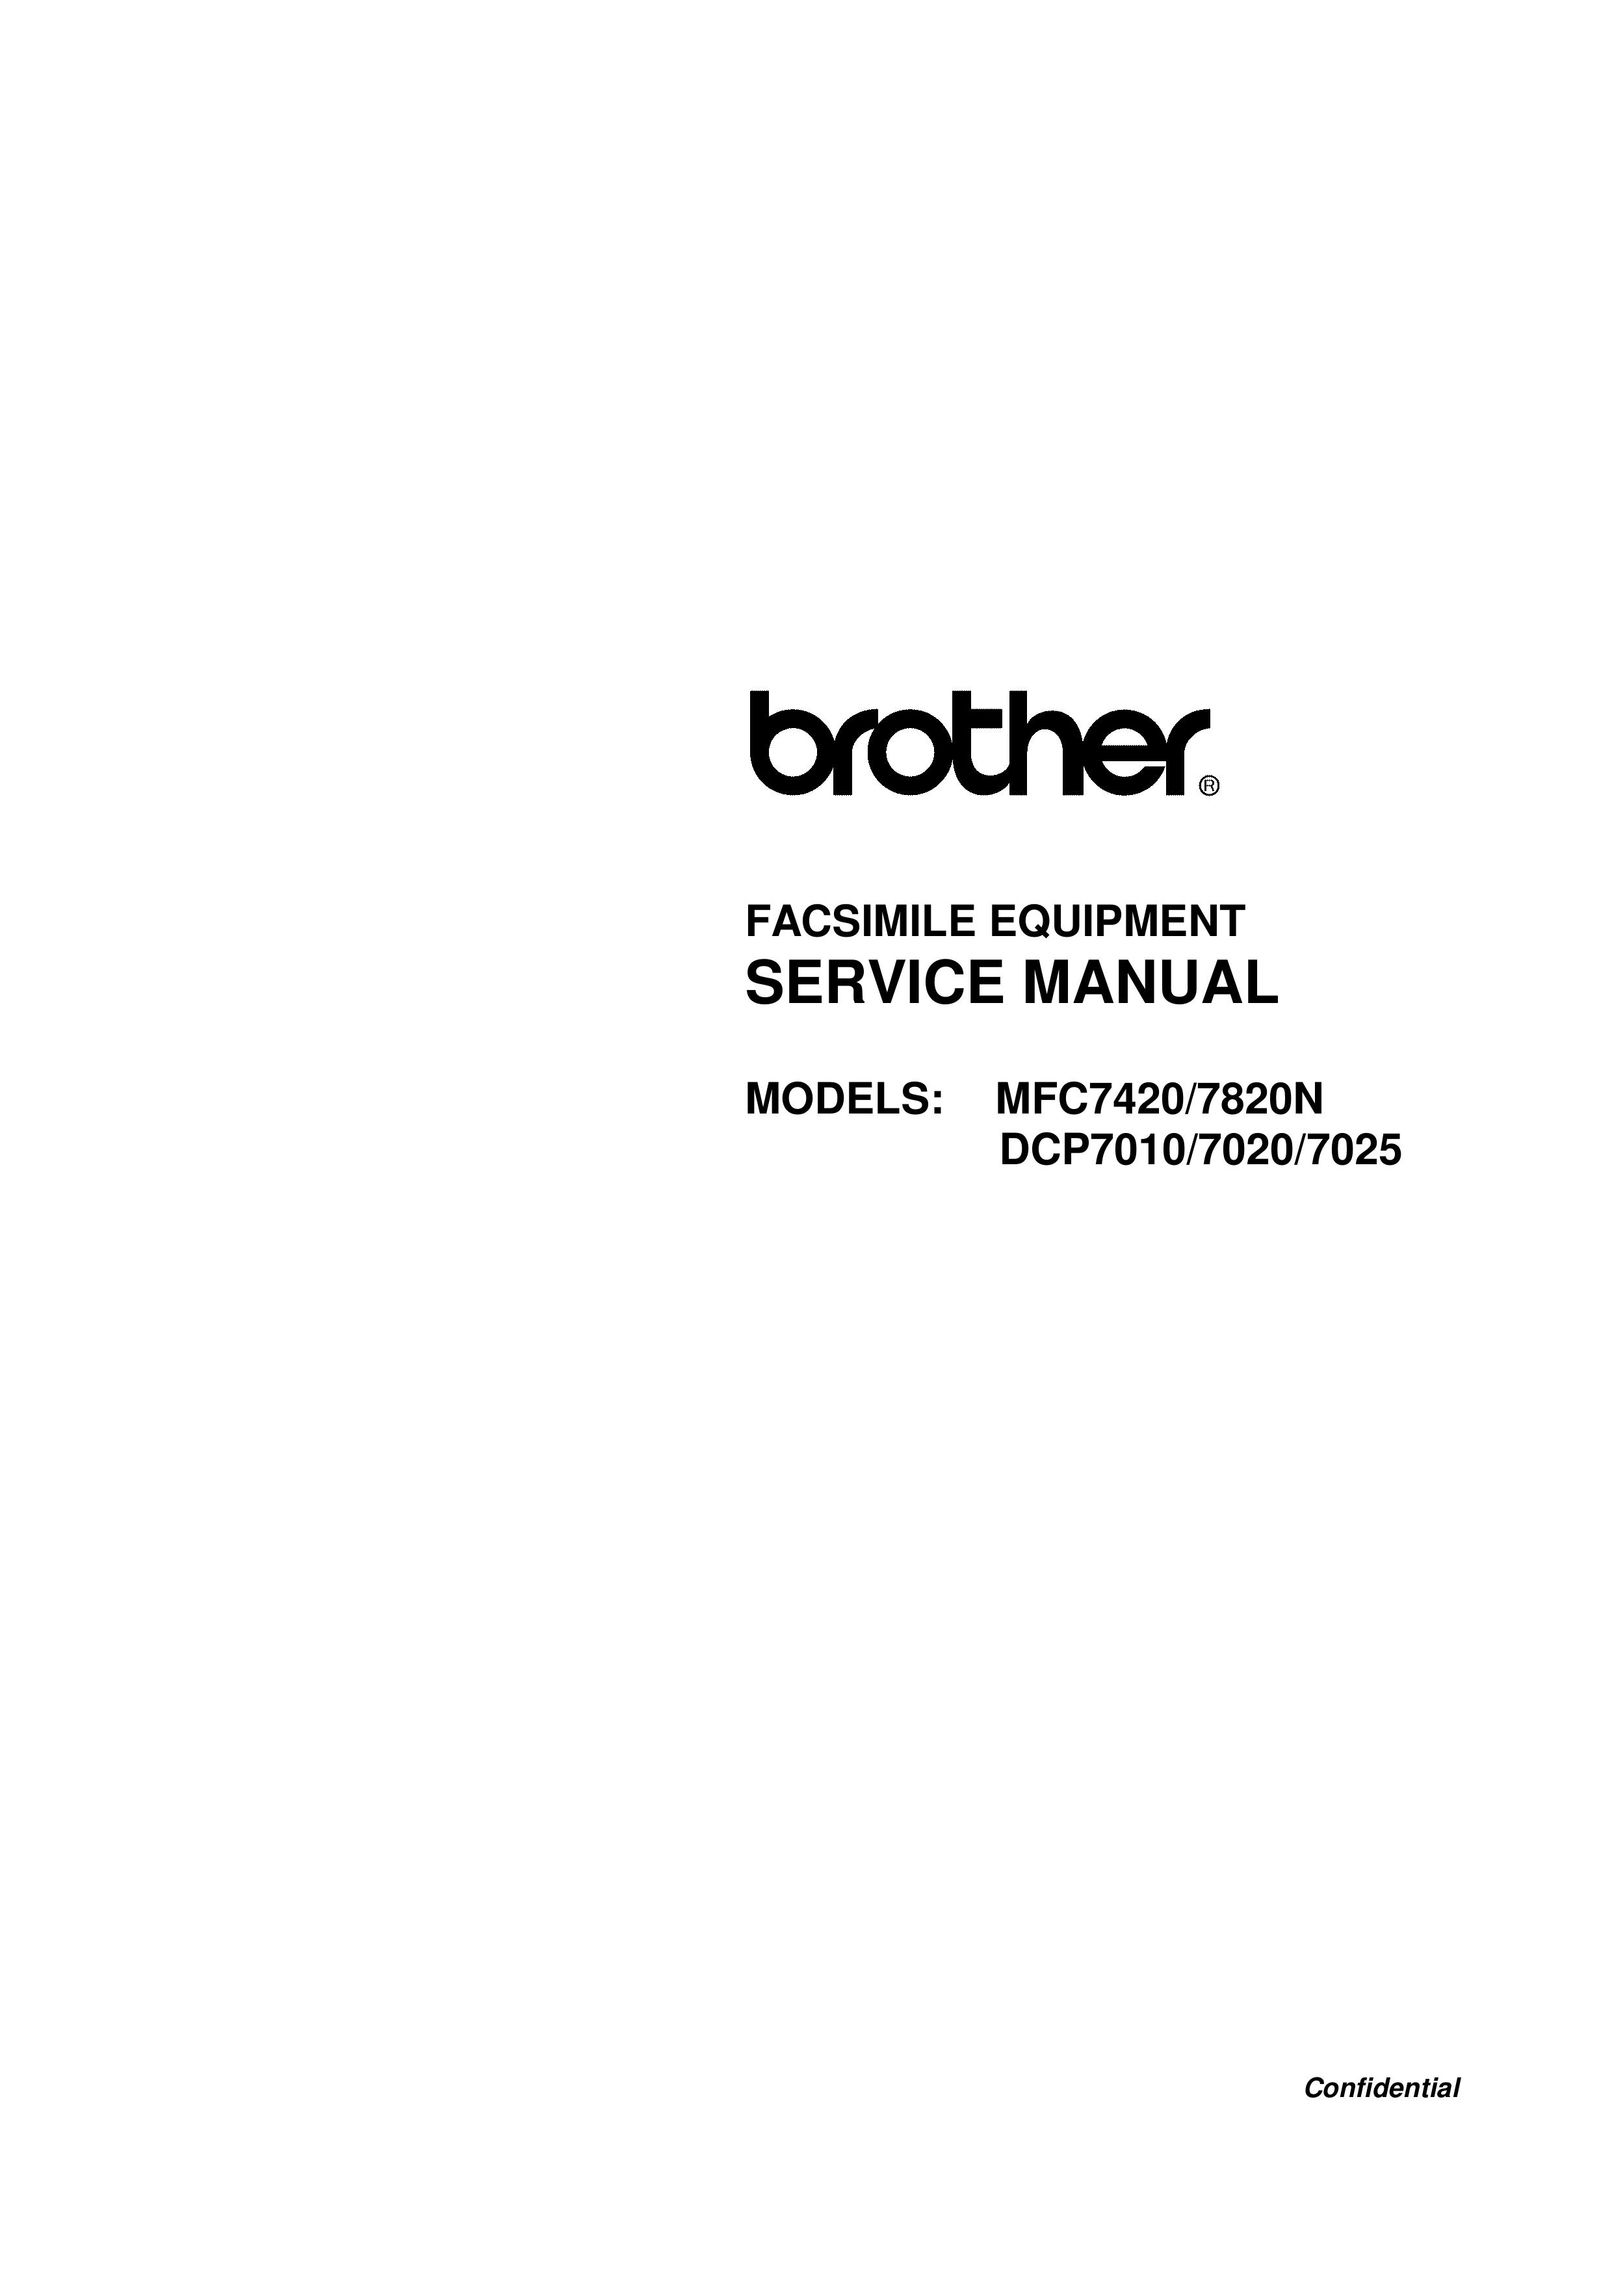 Brother DCP7020 Fax Machine User Manual